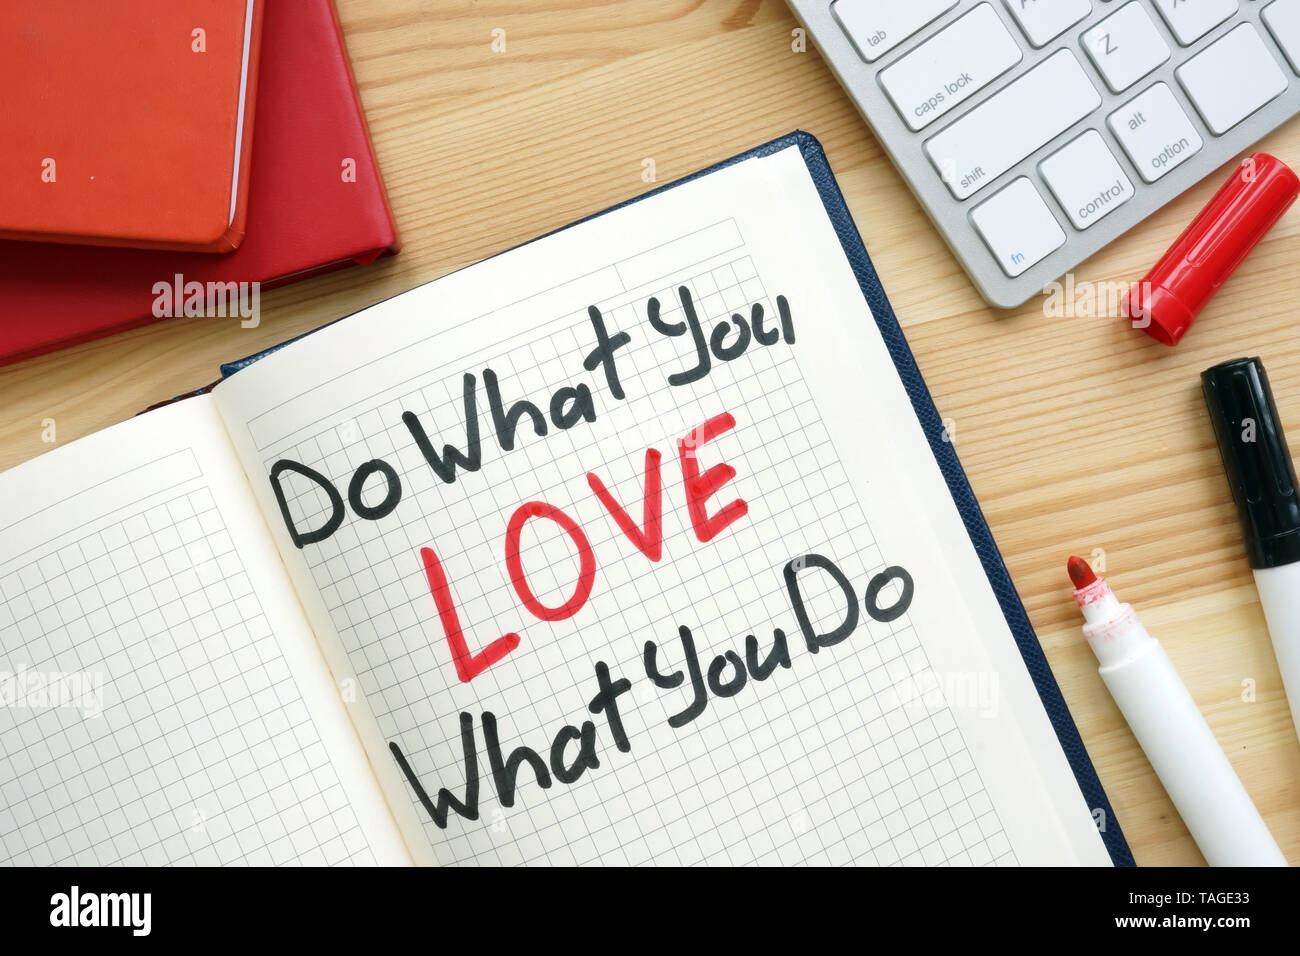 Do what you love what you do handwritten in a note. Stock Photo